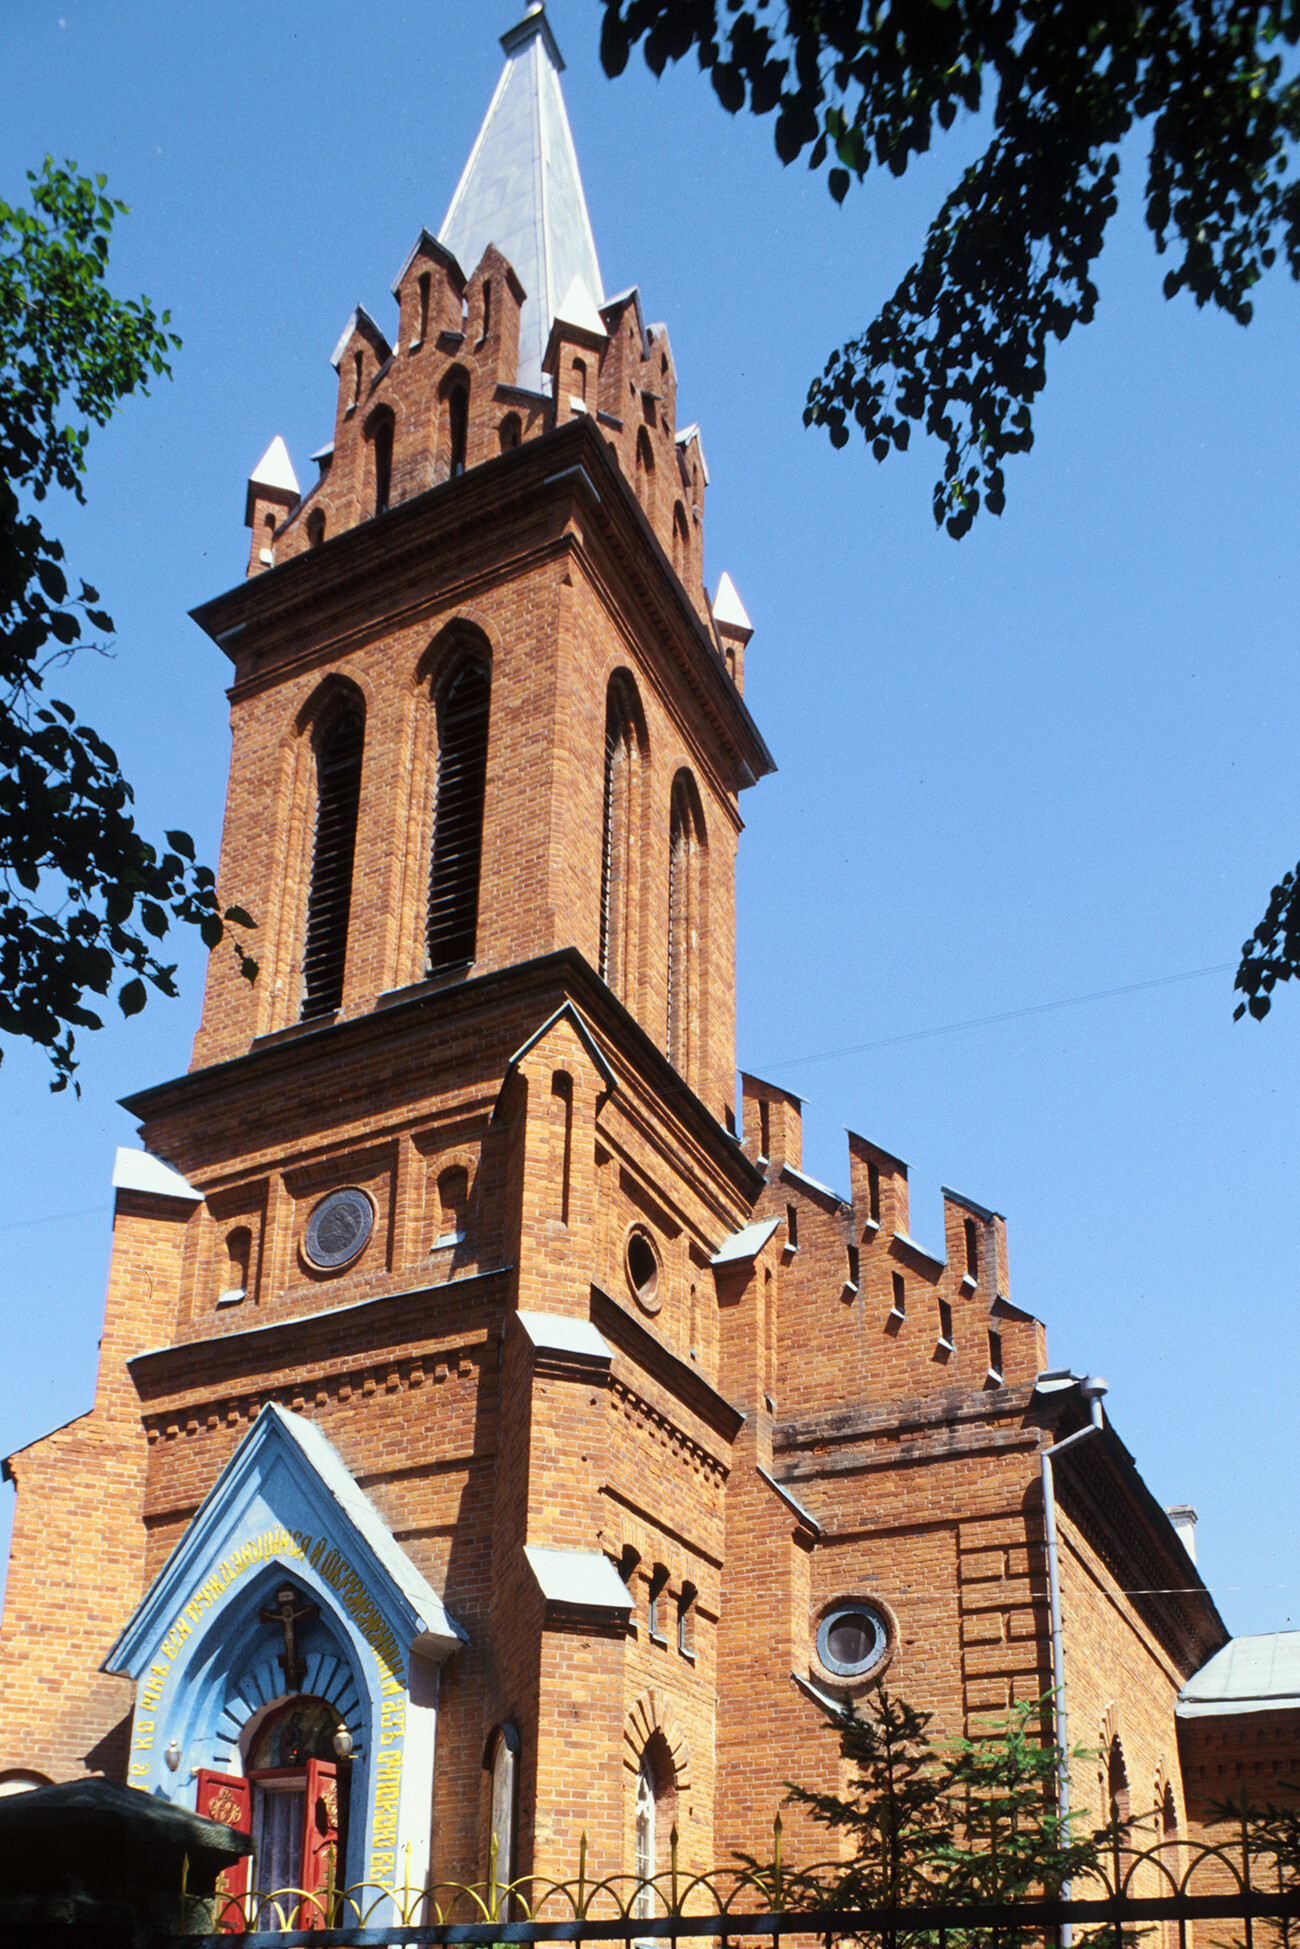 Former Catholic Cathedral of the Annunciation. Built in 1896, with bell tower added in 1911. Building transferred to Orthodox church in 1940s, when it became the Annunciation Cathedral. Now Church of Archangel Gabriel. June 13, 2002